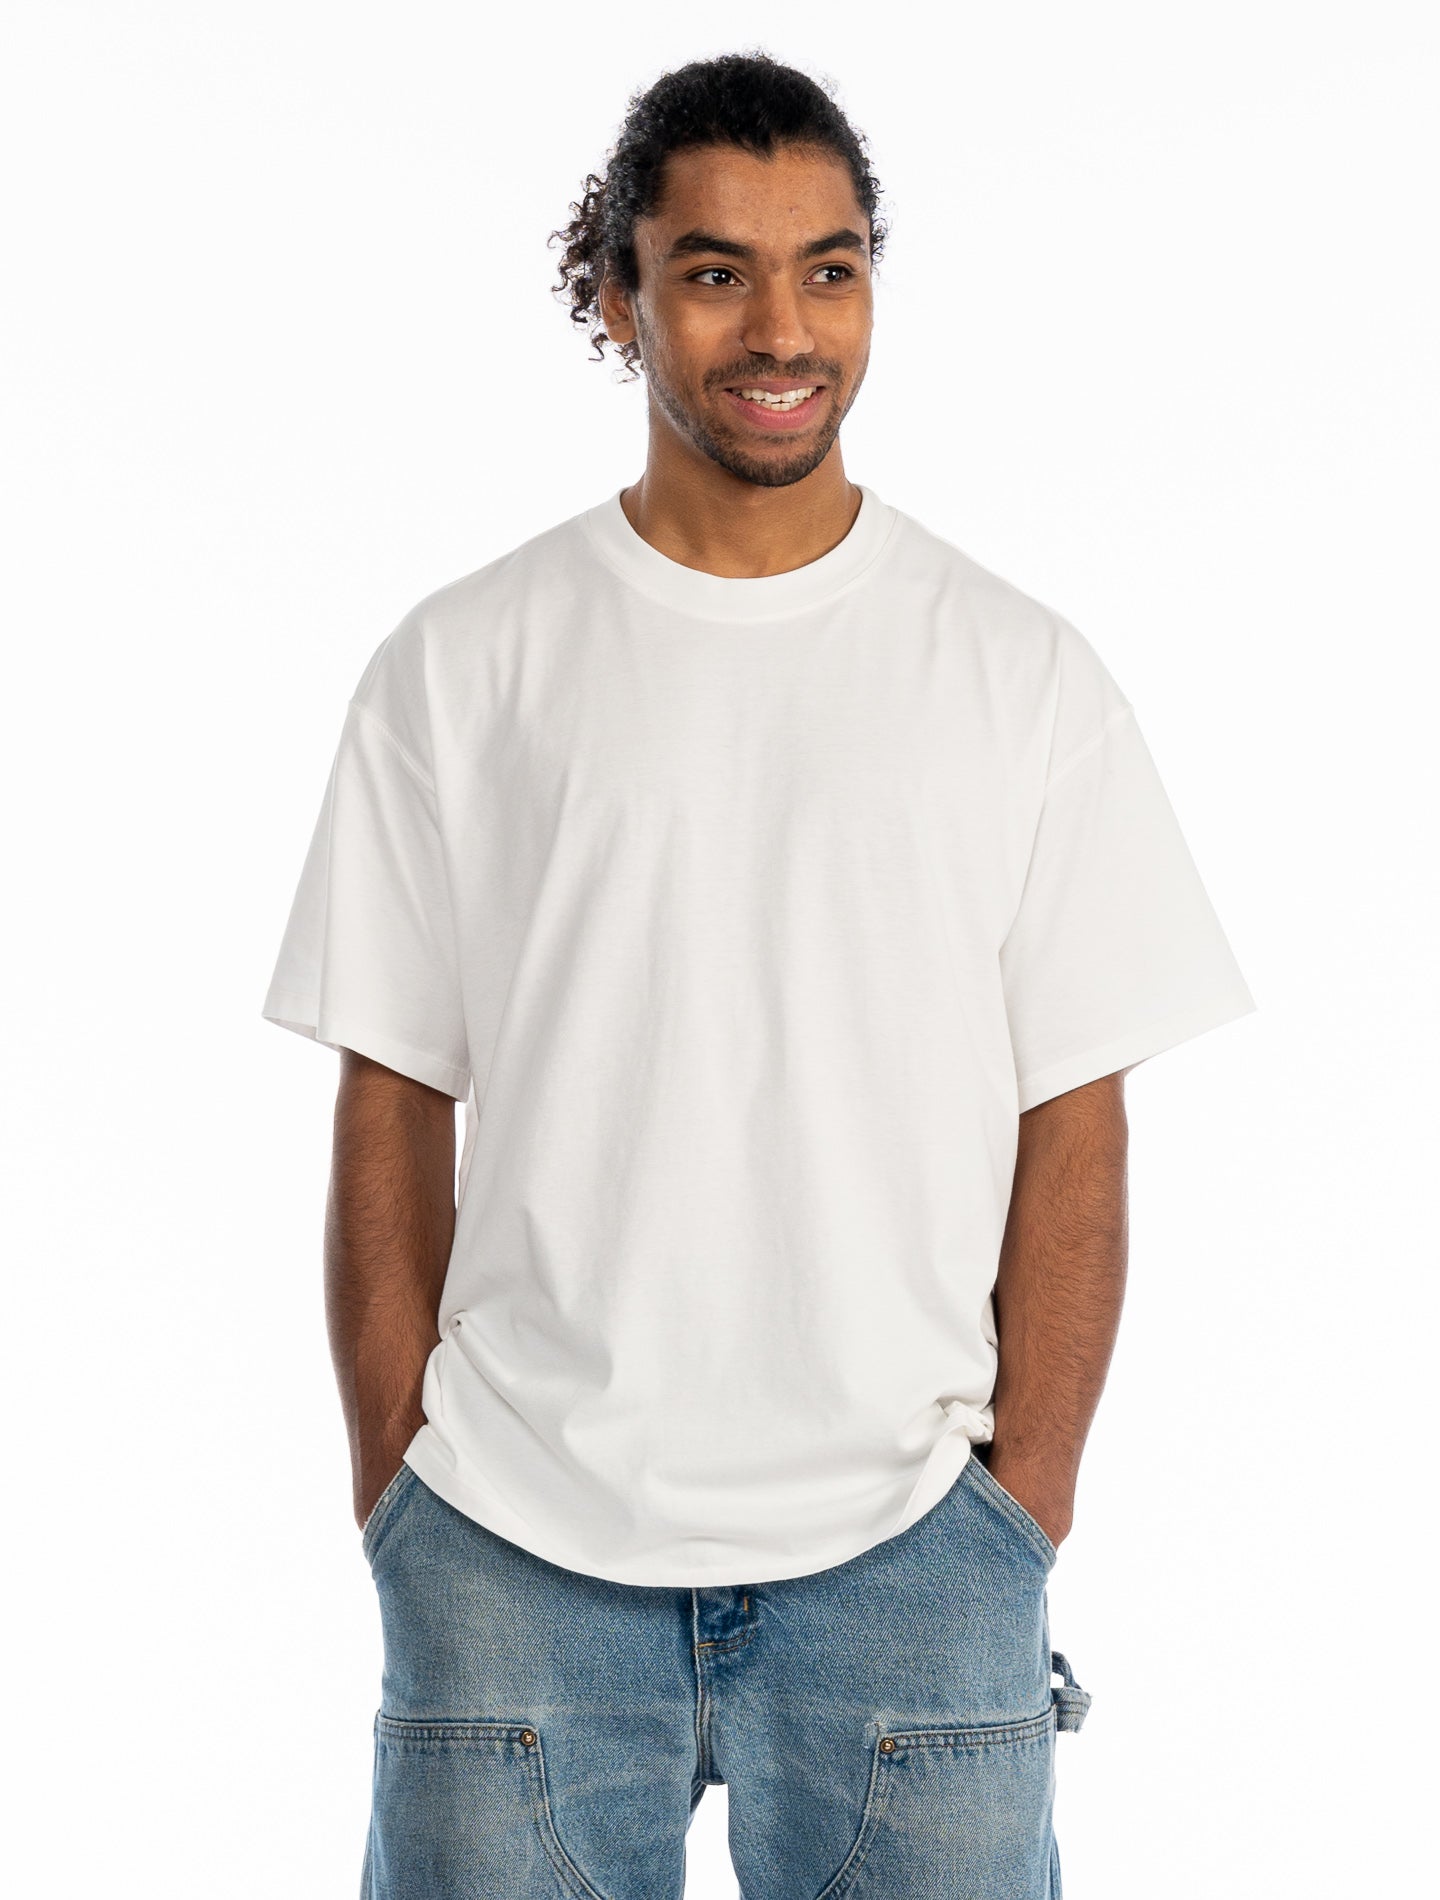 Le tee-shirt Super Willie® jersey bio-recyclé Blanc cheesecake